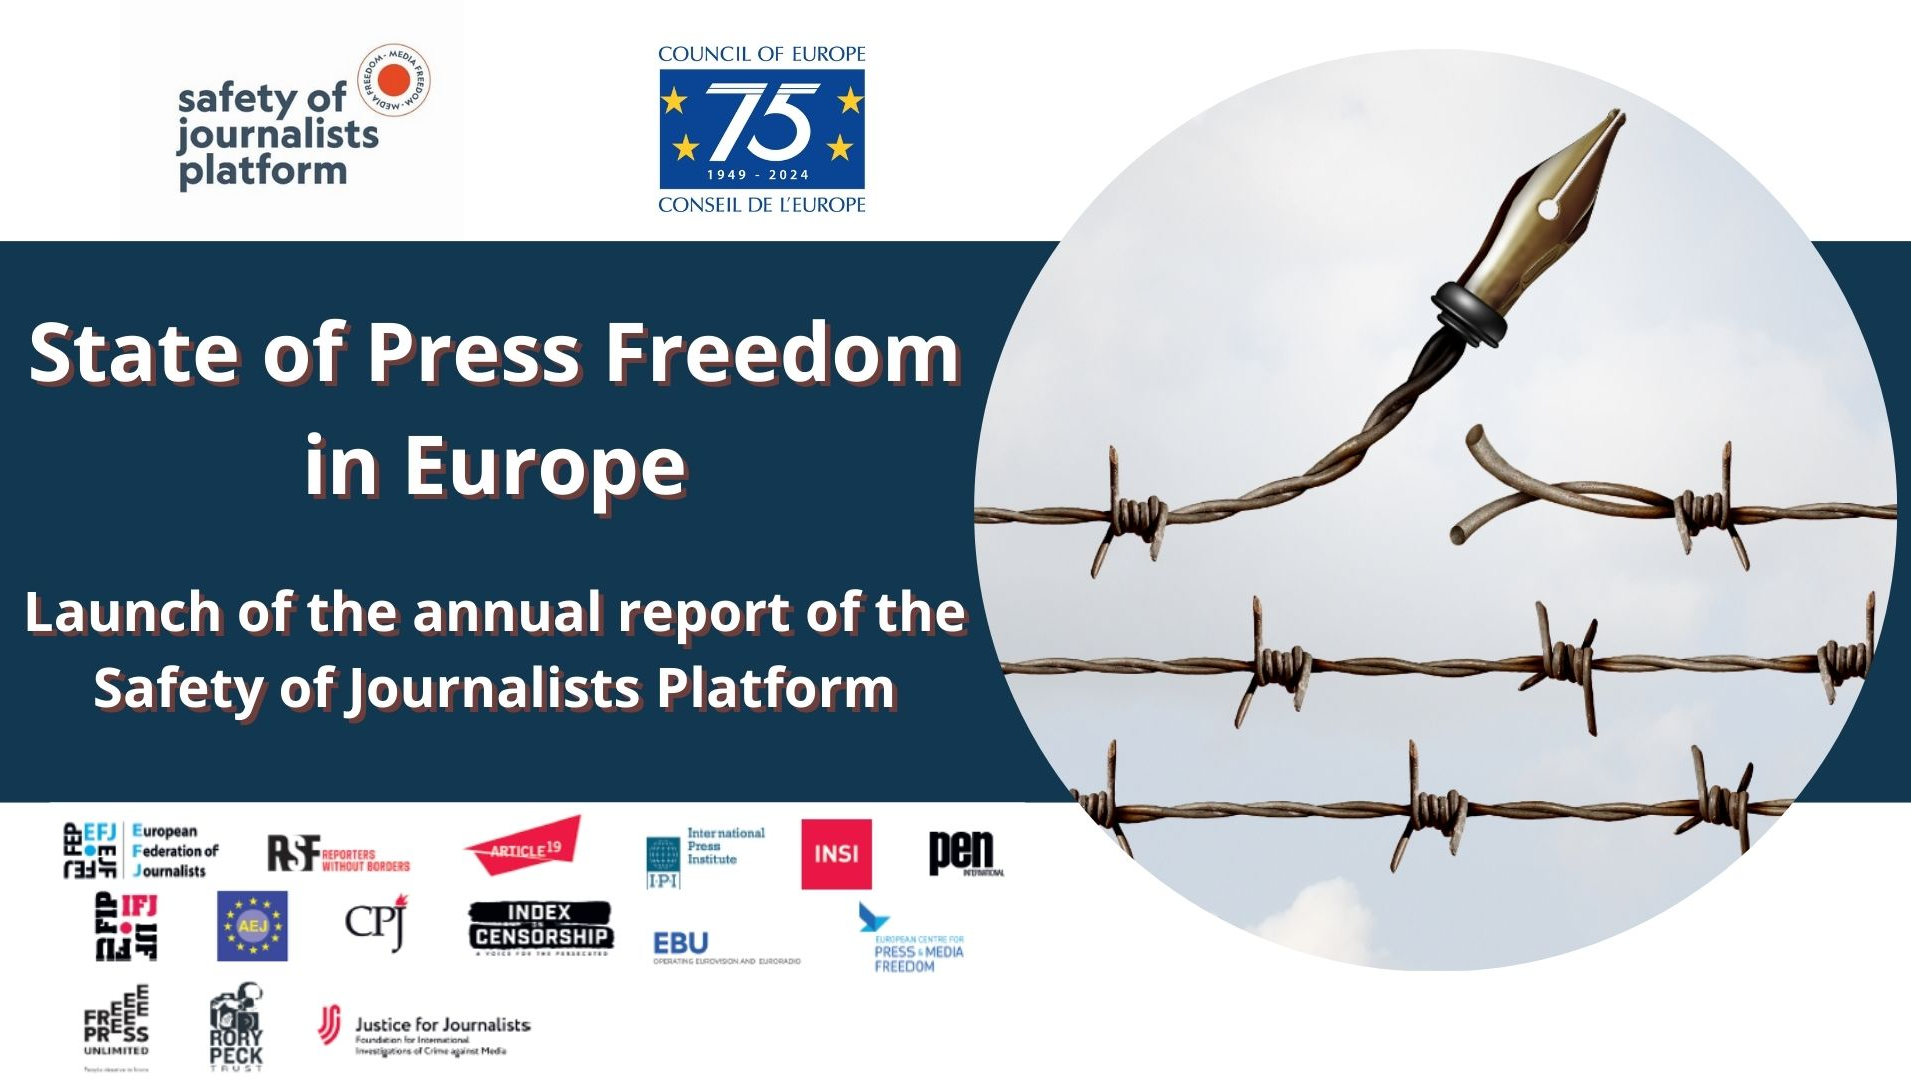 Journalists at risk: insights from the Council of Europe’s Safety Platform